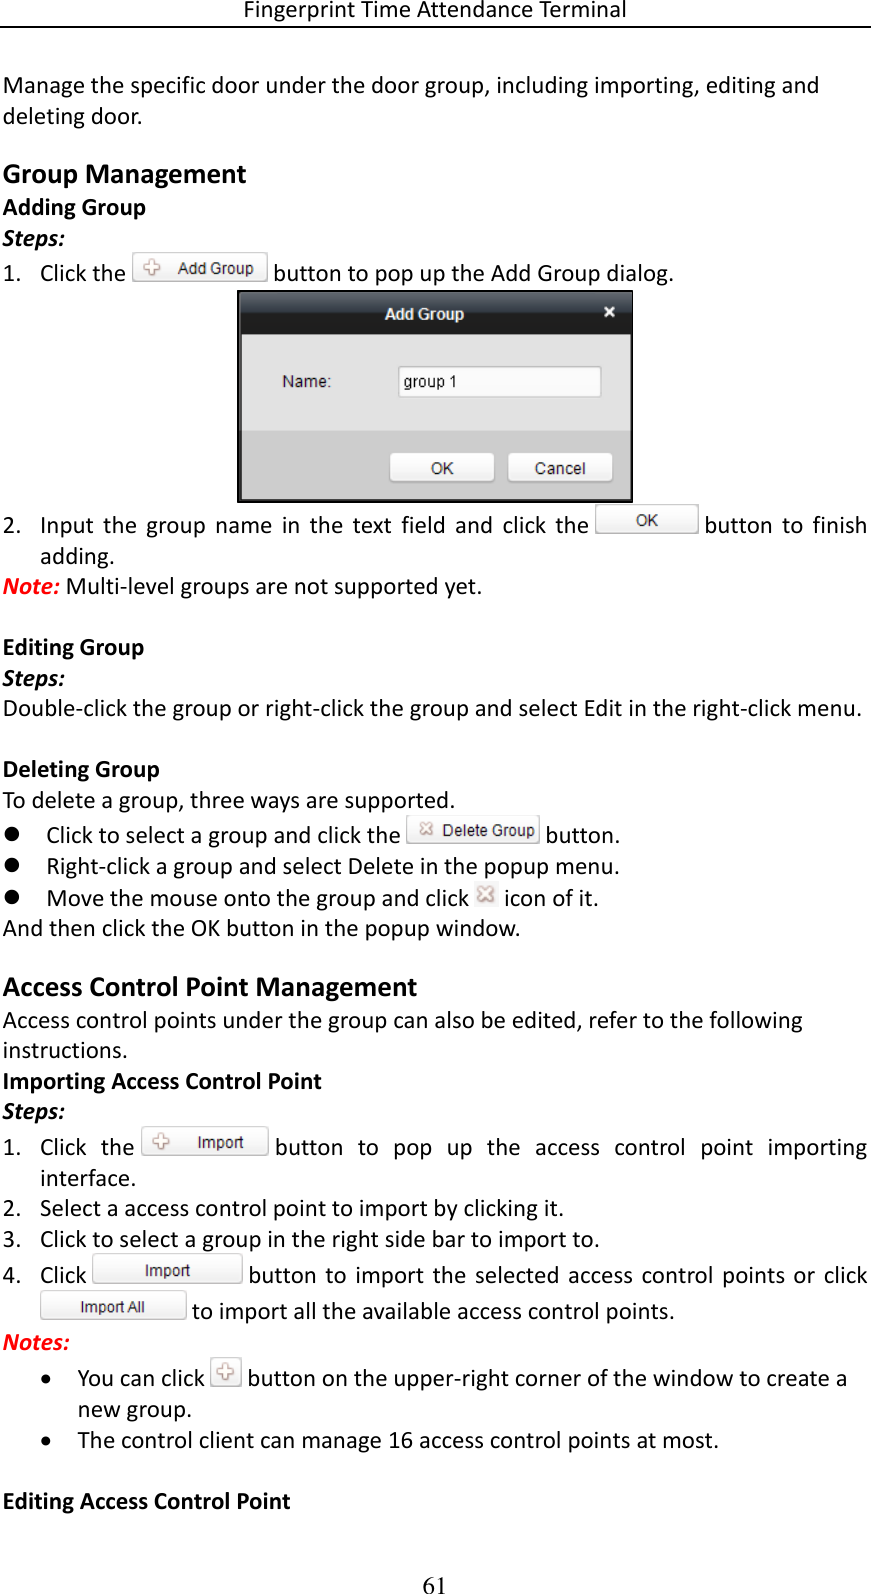 Fingerprint Time Attendance Terminal 61 Manage the specific door under the door group, including importing, editing and deleting door. Group Management Adding Group Steps: 1. Click the   button to pop up the Add Group dialog.  2. Input  the  group  name  in  the  text  field  and  click  the   button  to  finish adding. Note: Multi-level groups are not supported yet.  Editing Group Steps: Double-click the group or right-click the group and select Edit in the right-click menu.  Deleting Group To delete a group, three ways are supported.  Click to select a group and click the   button.  Right-click a group and select Delete in the popup menu.  Move the mouse onto the group and click   icon of it. And then click the OK button in the popup window. Access Control Point Management Access control points under the group can also be edited, refer to the following instructions. Importing Access Control Point Steps: 1. Click  the   button  to  pop  up  the  access  control  point  importing interface. 2. Select a access control point to import by clicking it.   3. Click to select a group in the right side bar to import to. 4. Click   button to  import  the  selected access  control  points  or  click  to import all the available access control points.  Notes:  You can click   button on the upper-right corner of the window to create a new group.  The control client can manage 16 access control points at most.   Editing Access Control Point 